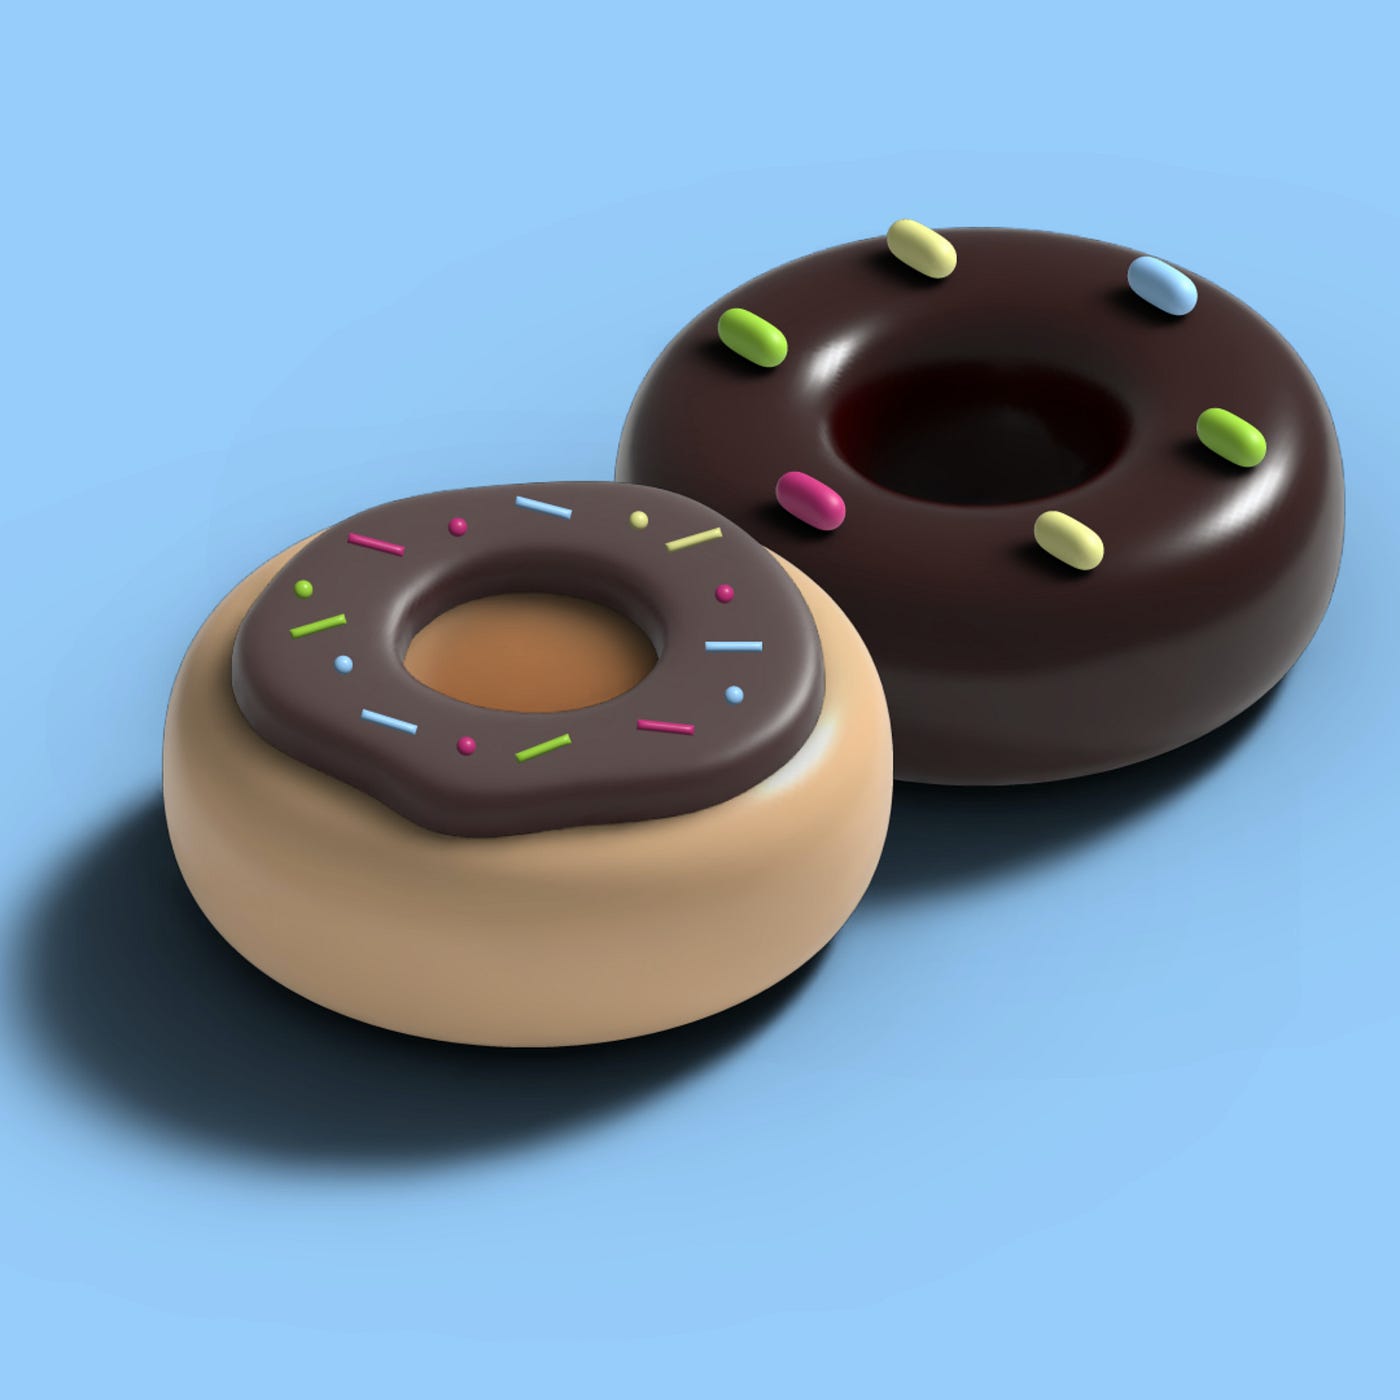 Digital graphic of 2 chocolate ring donuts